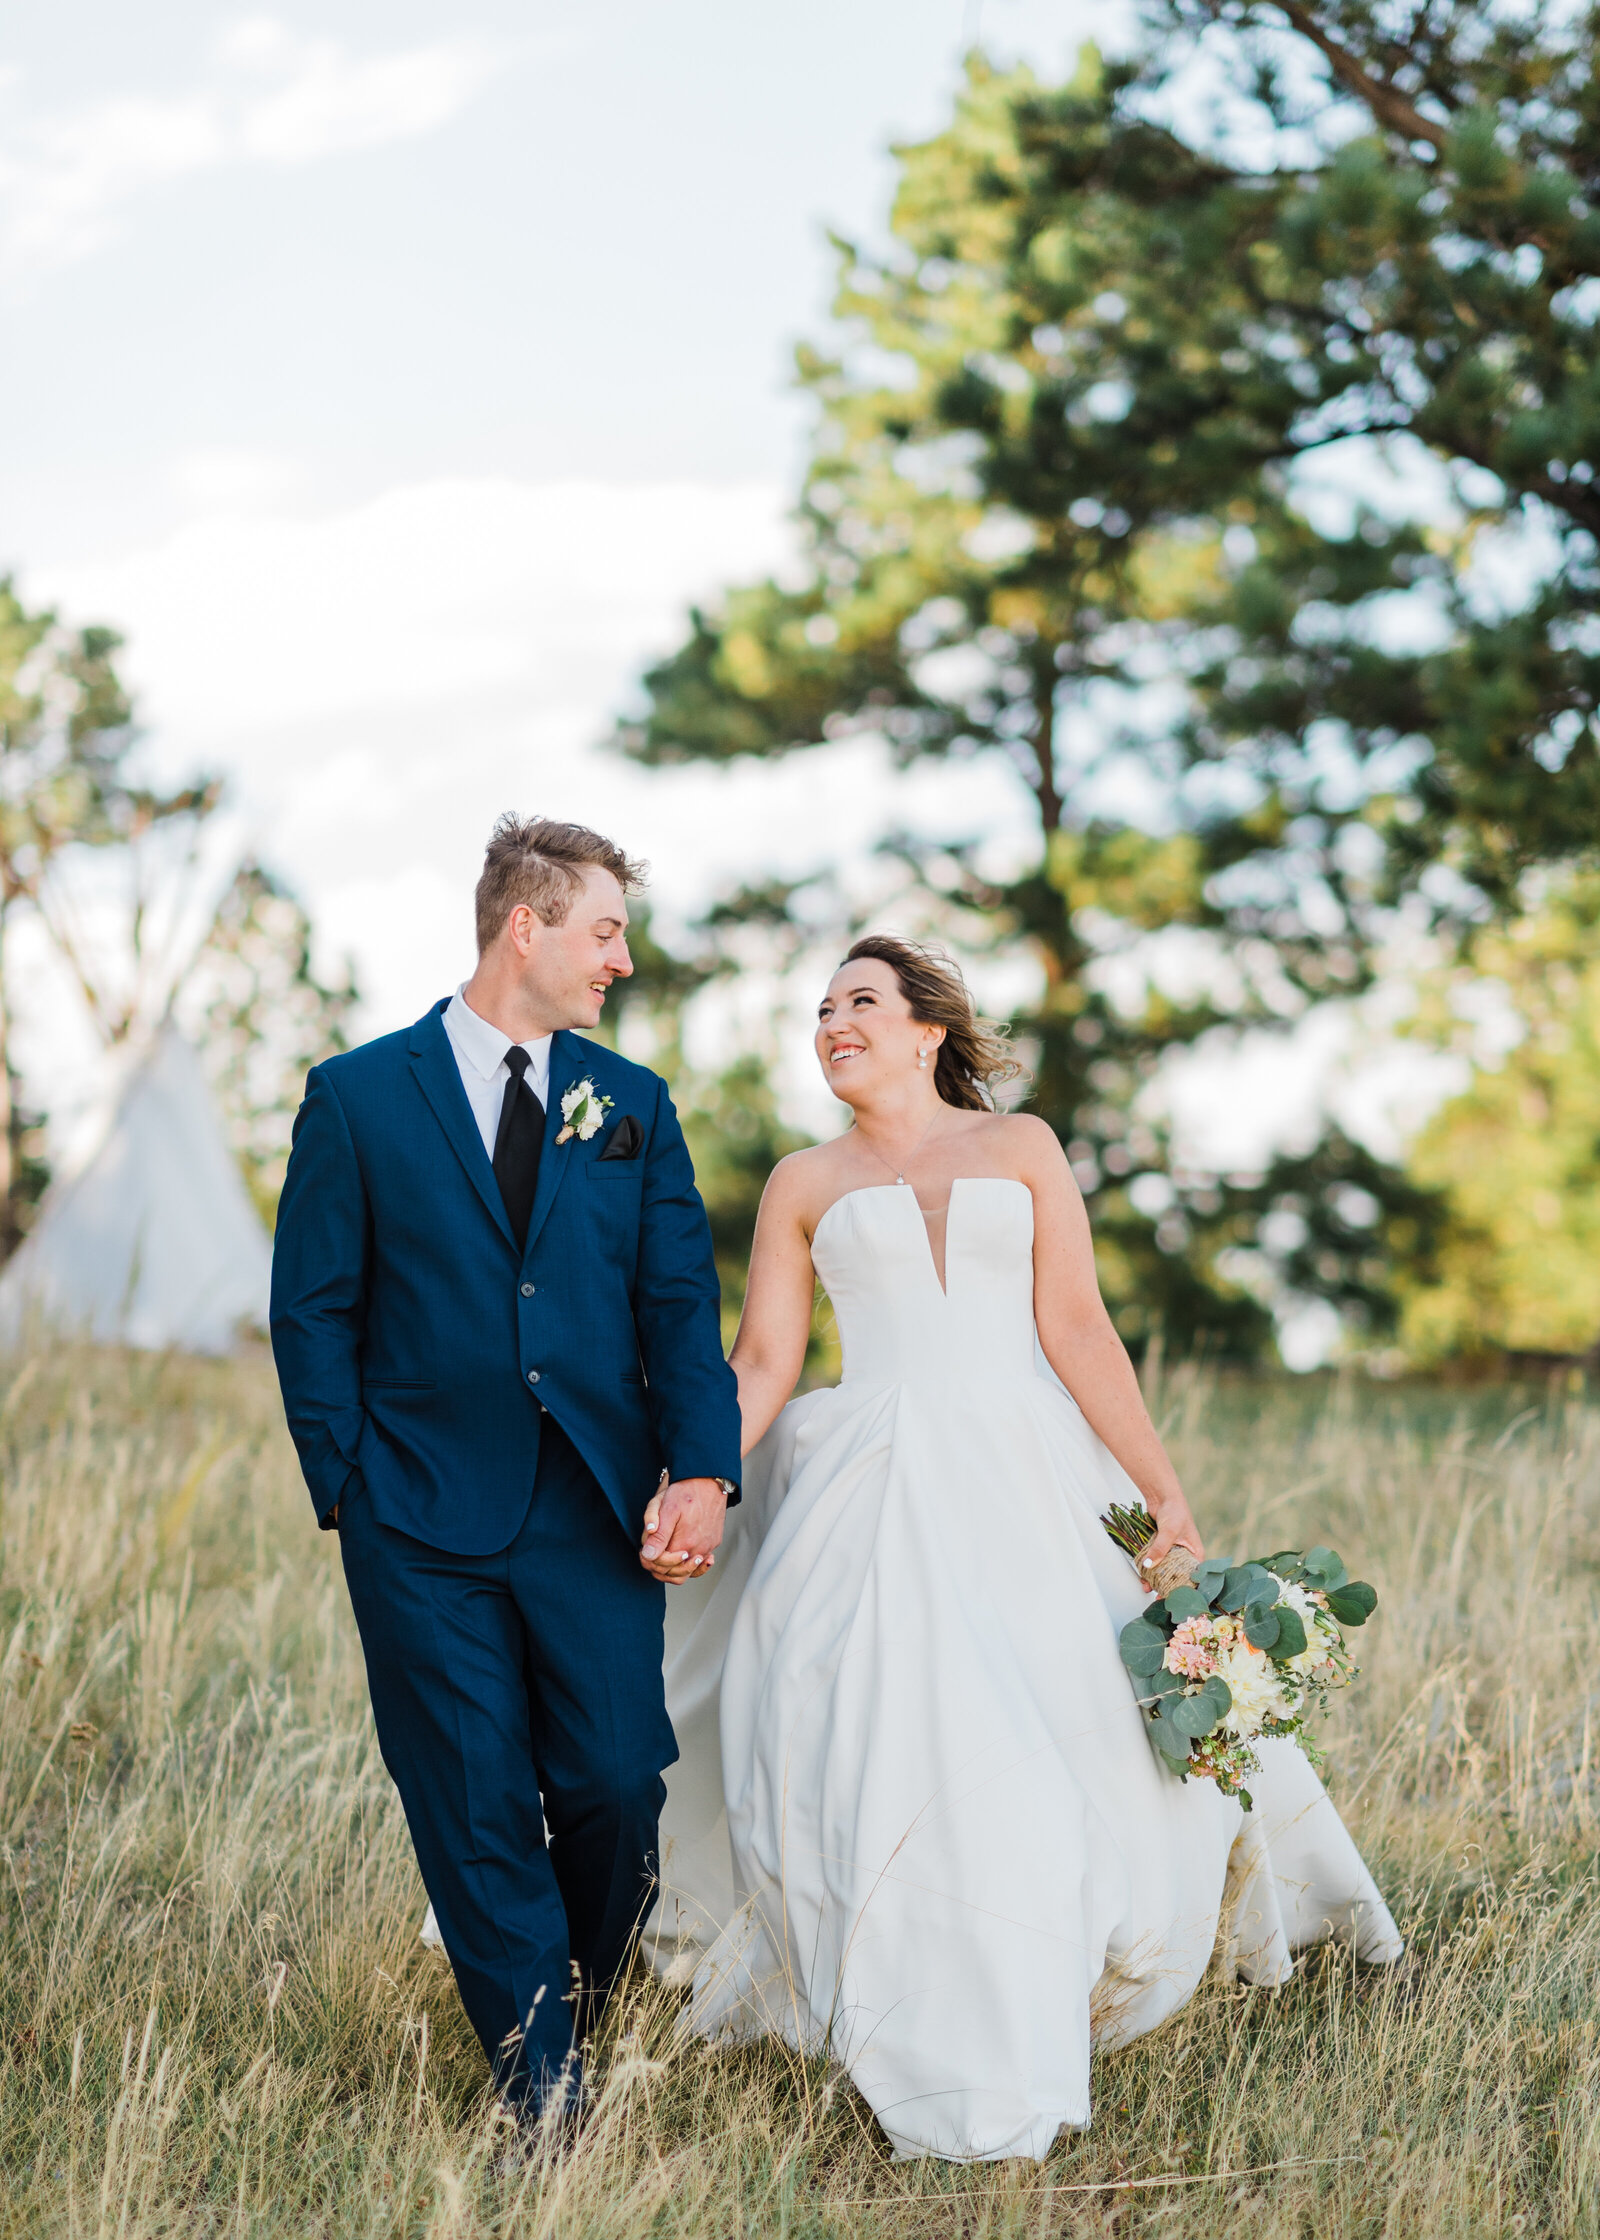 Man and Woman walking together in field at Colorado wedding